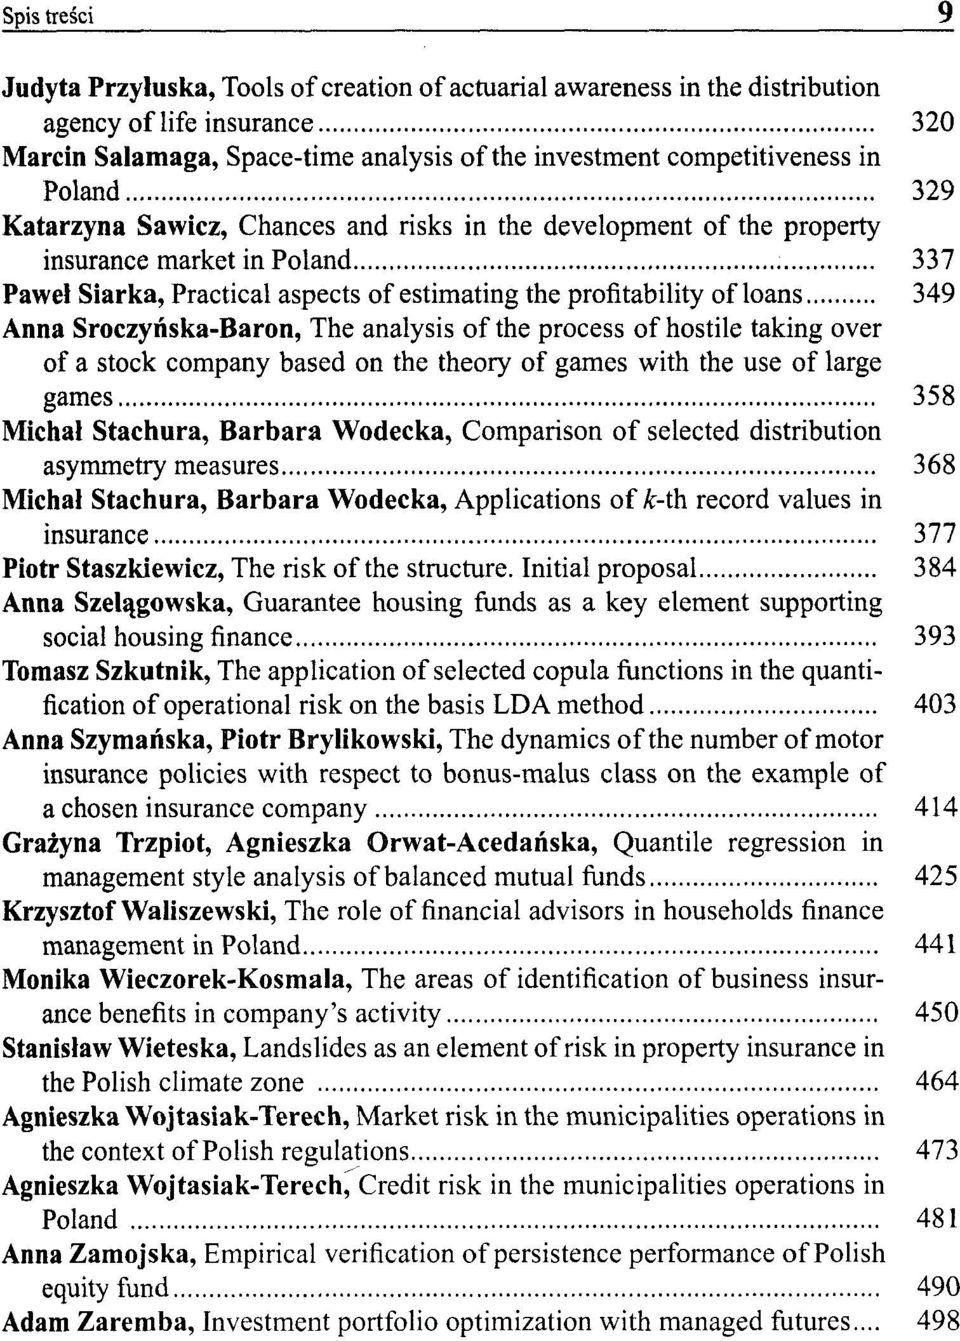 Sroczyńska-Baron, The analysis of the process of hostile taking over of a stock company based on the theory of games with the use of large games 358 Michał Stachura, Barbara Wodecka, Comparison of